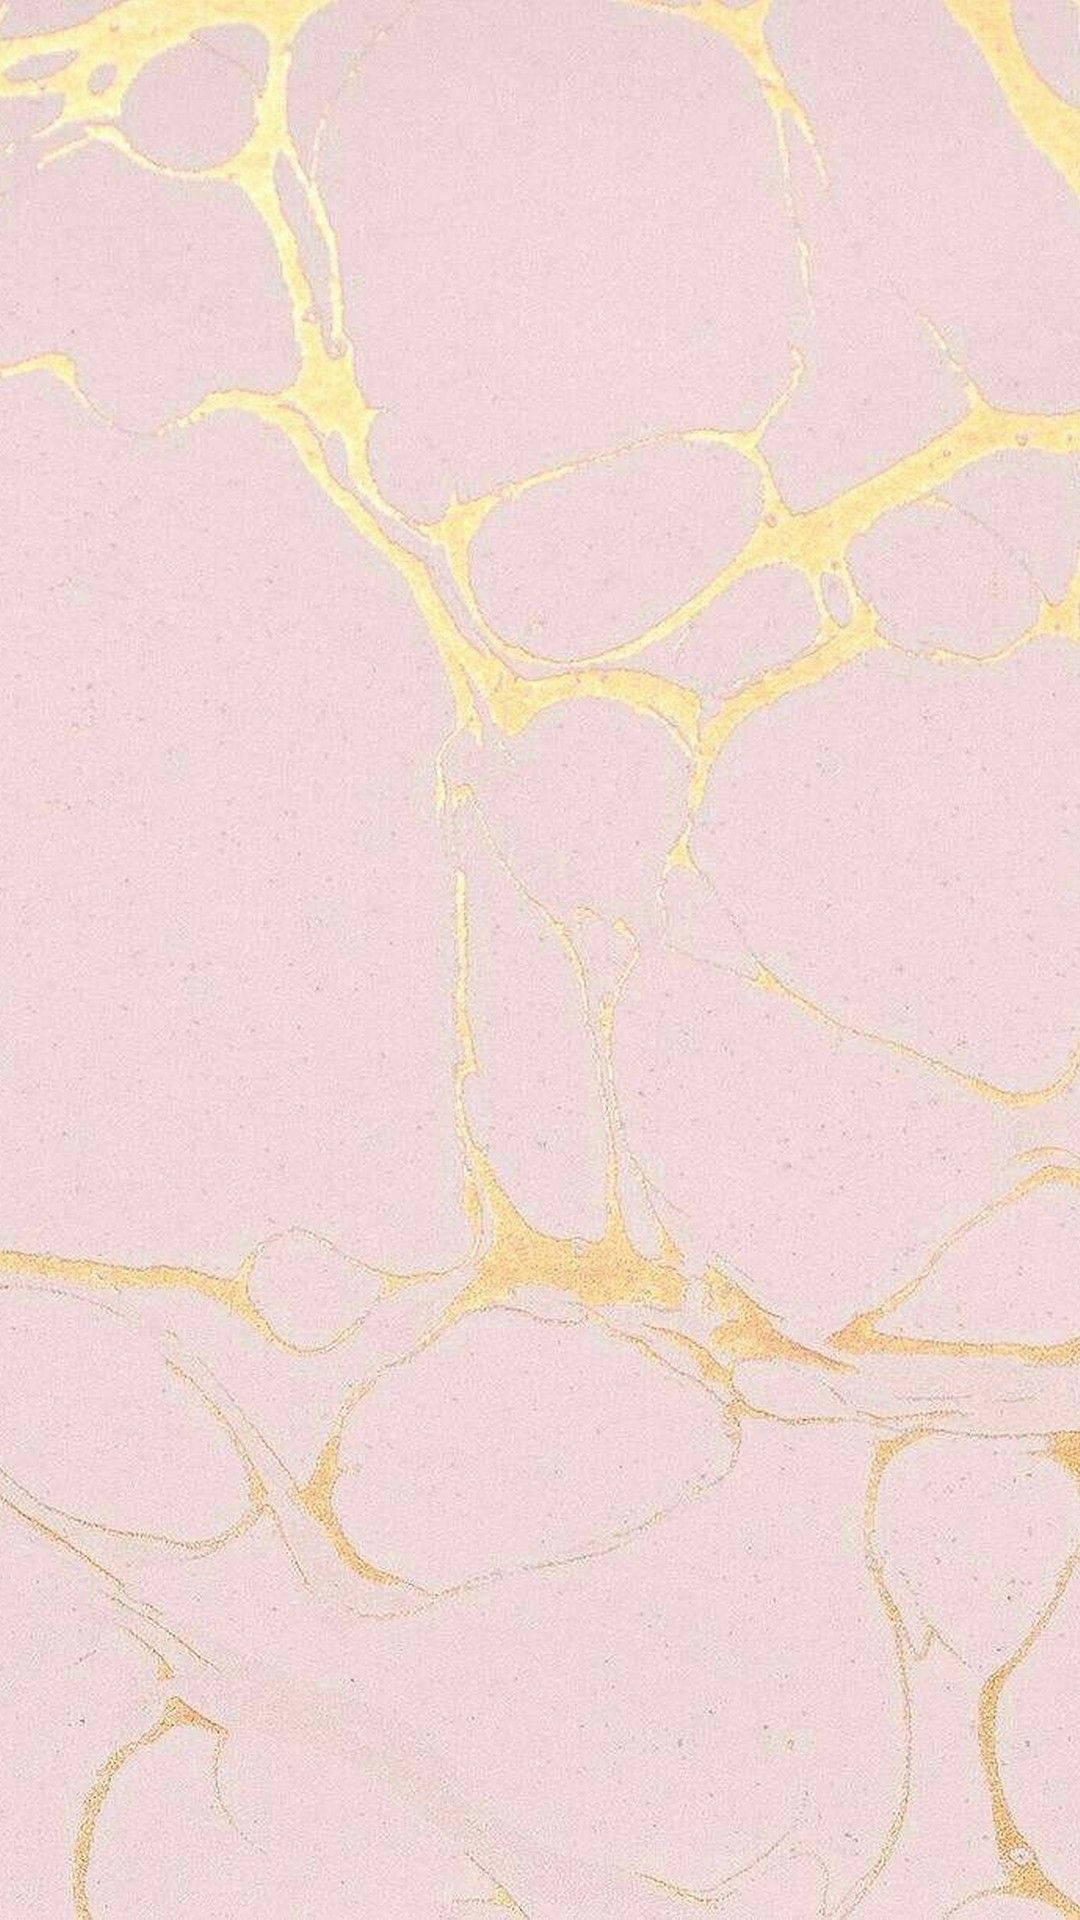 Pink With Gold Marble Iphone Wallpaper